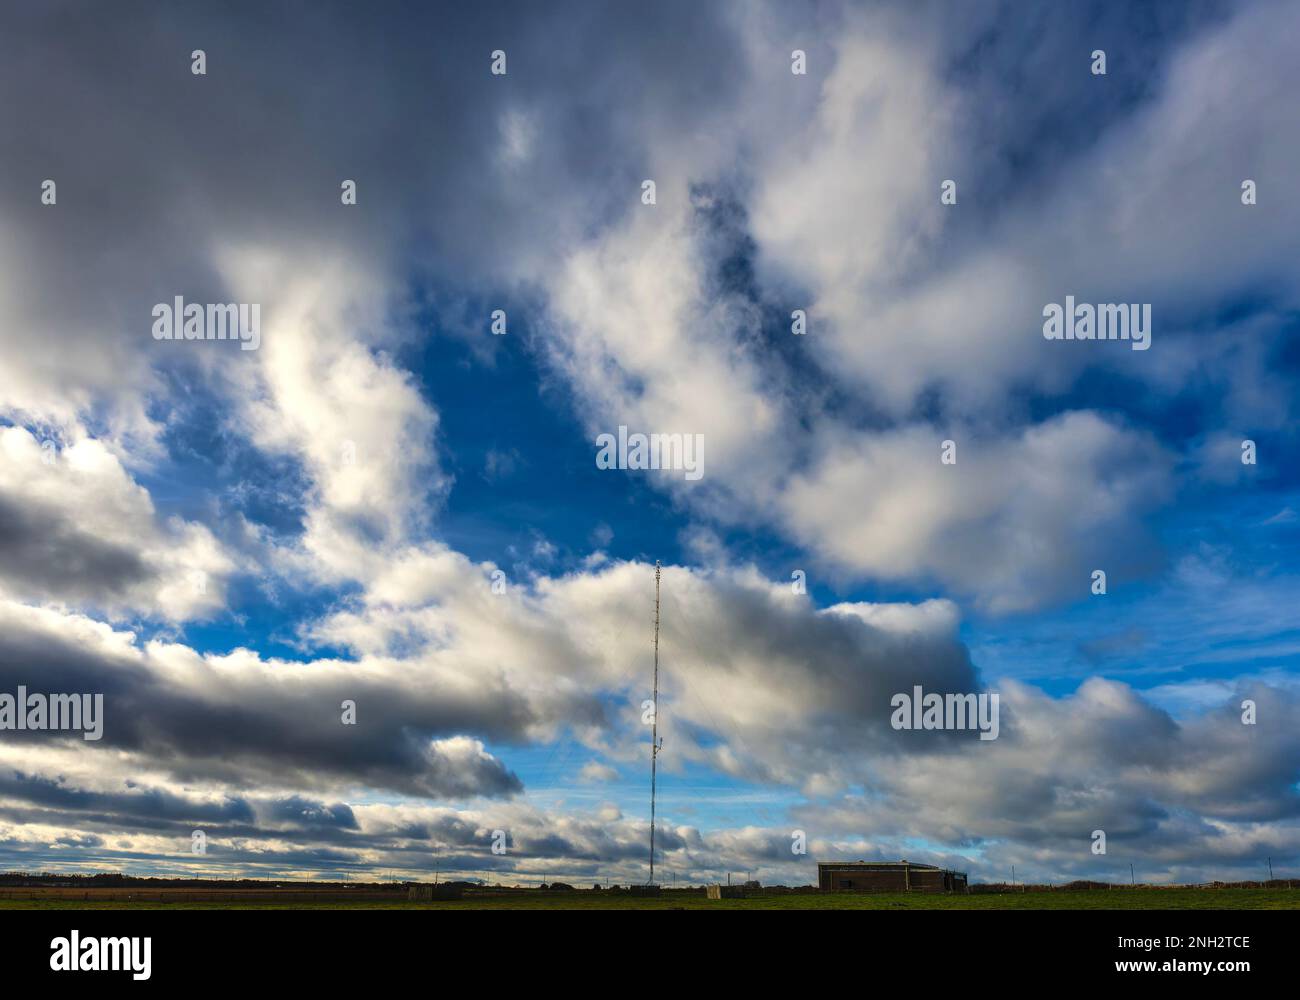 Large radio trandmitter tower in a cloud filled sky Stock Photo